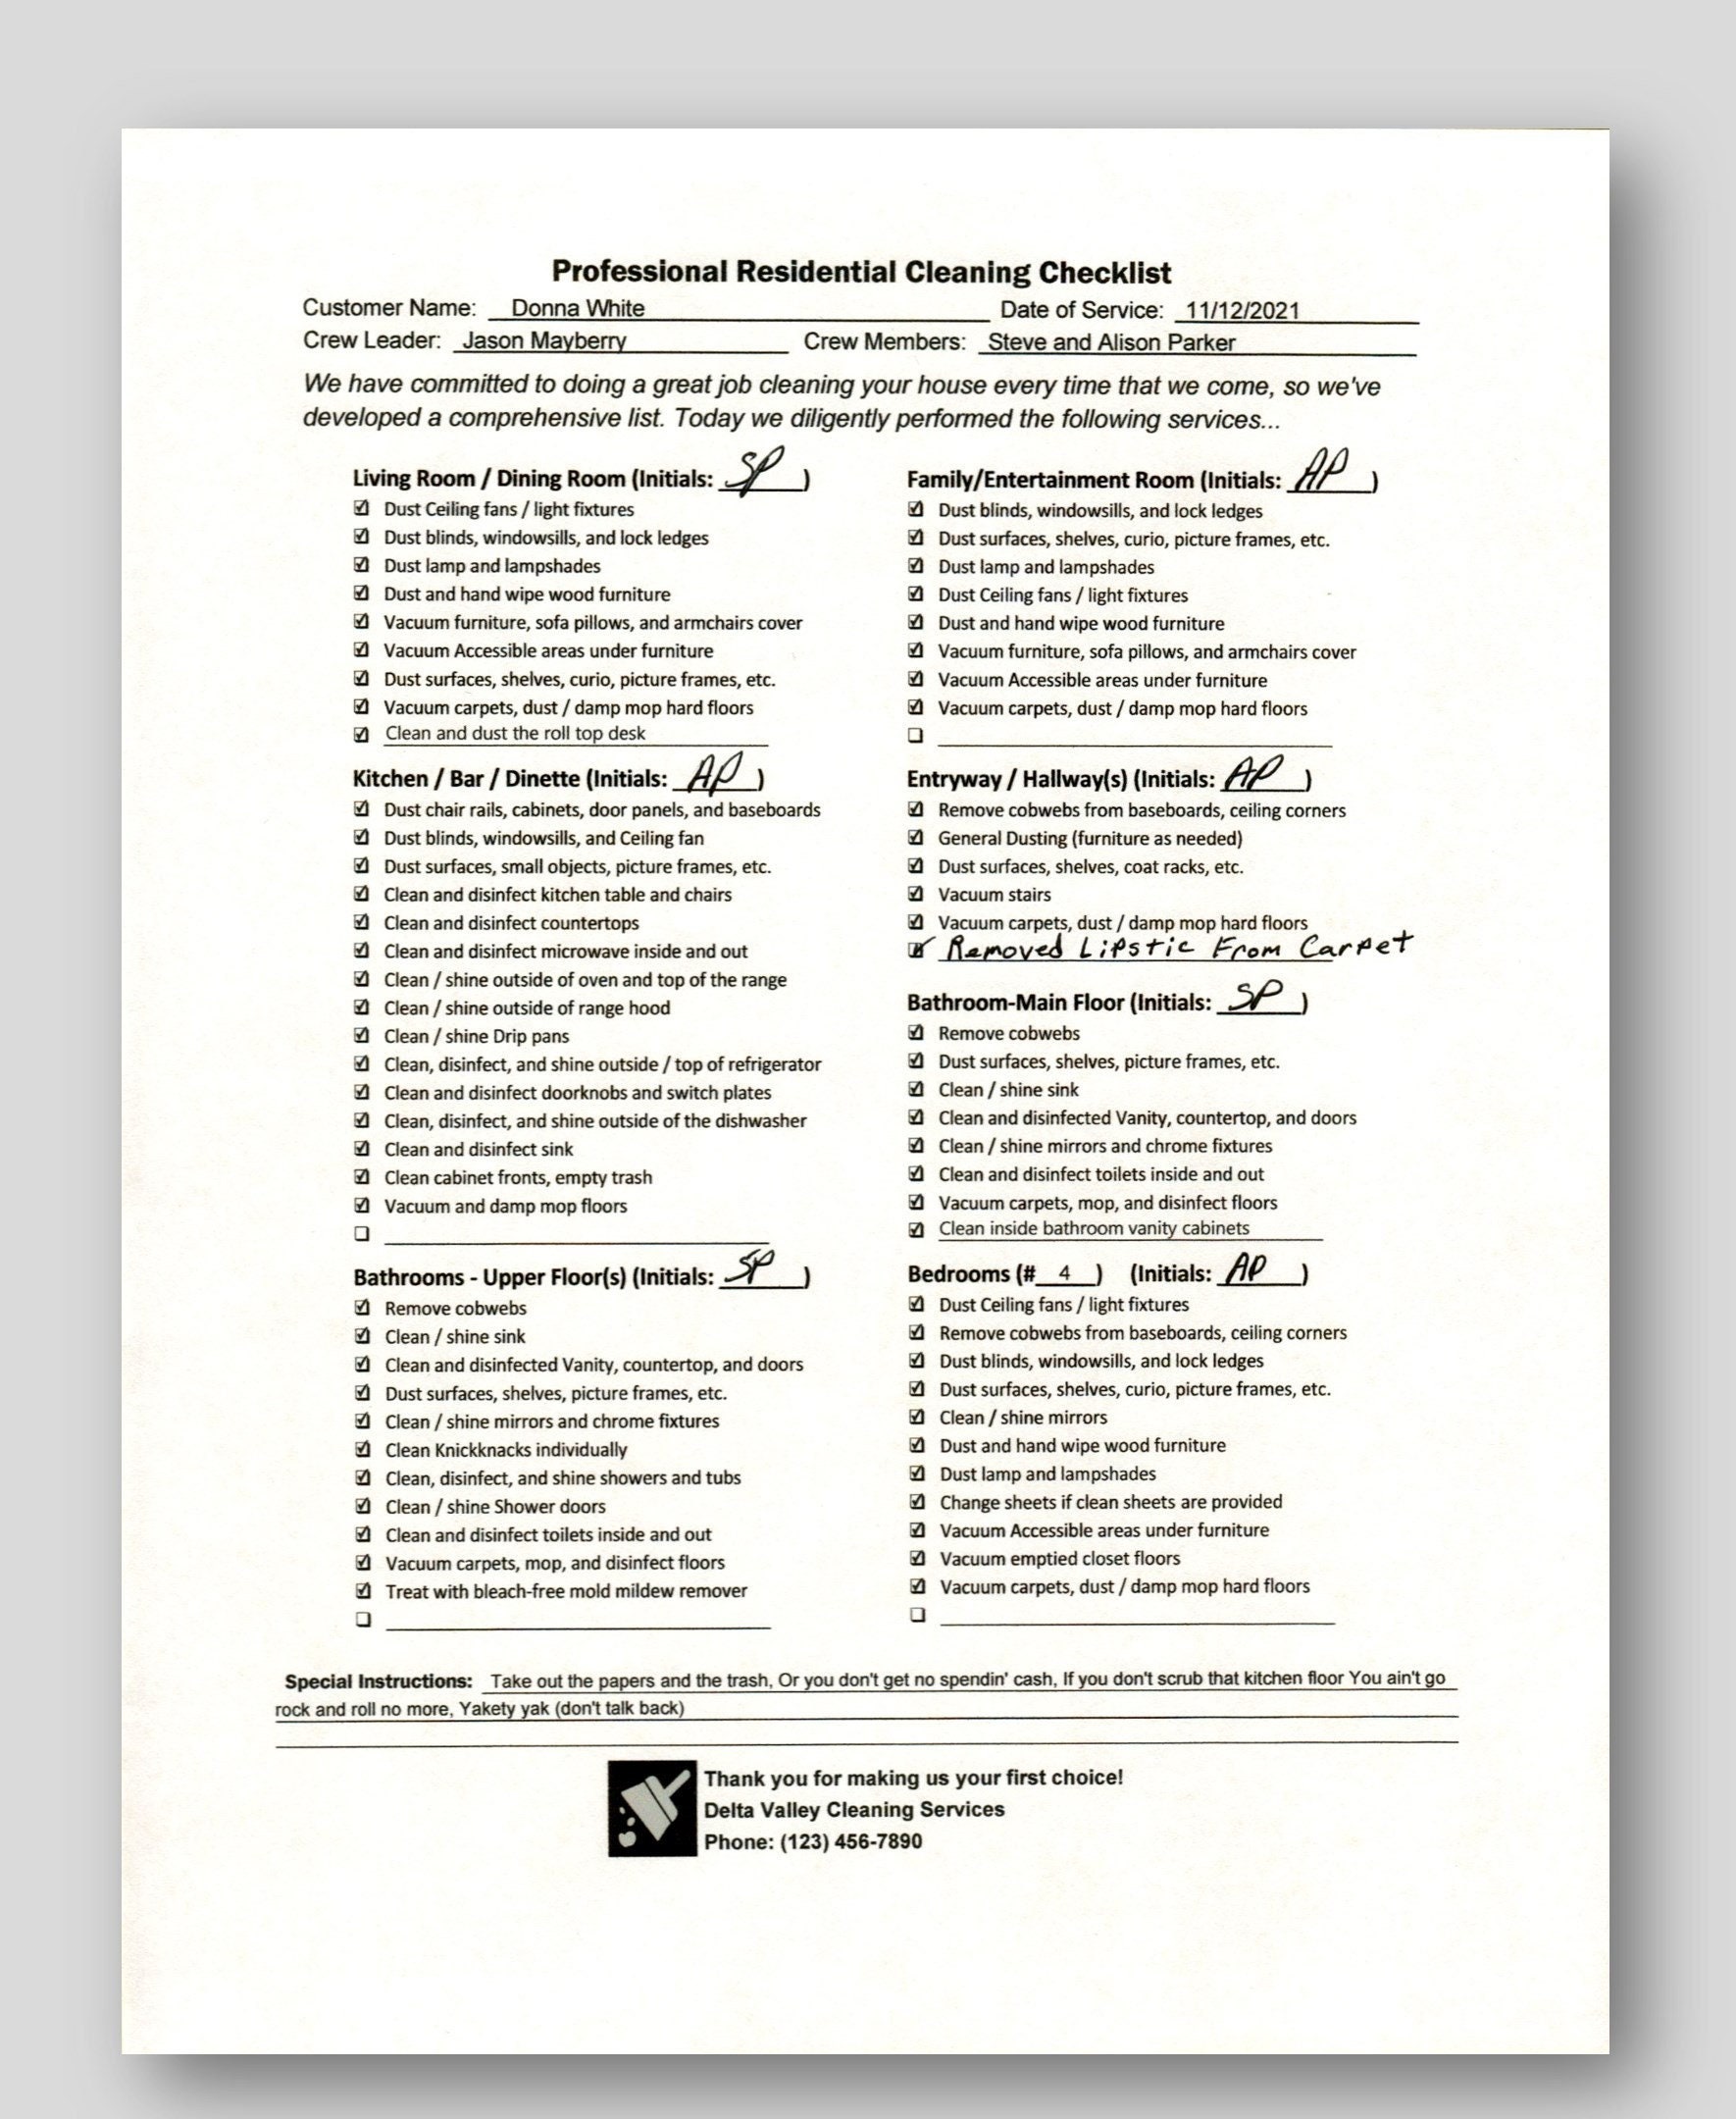 Professional Residential Cleaning Checklist Editable House Sites unimi it